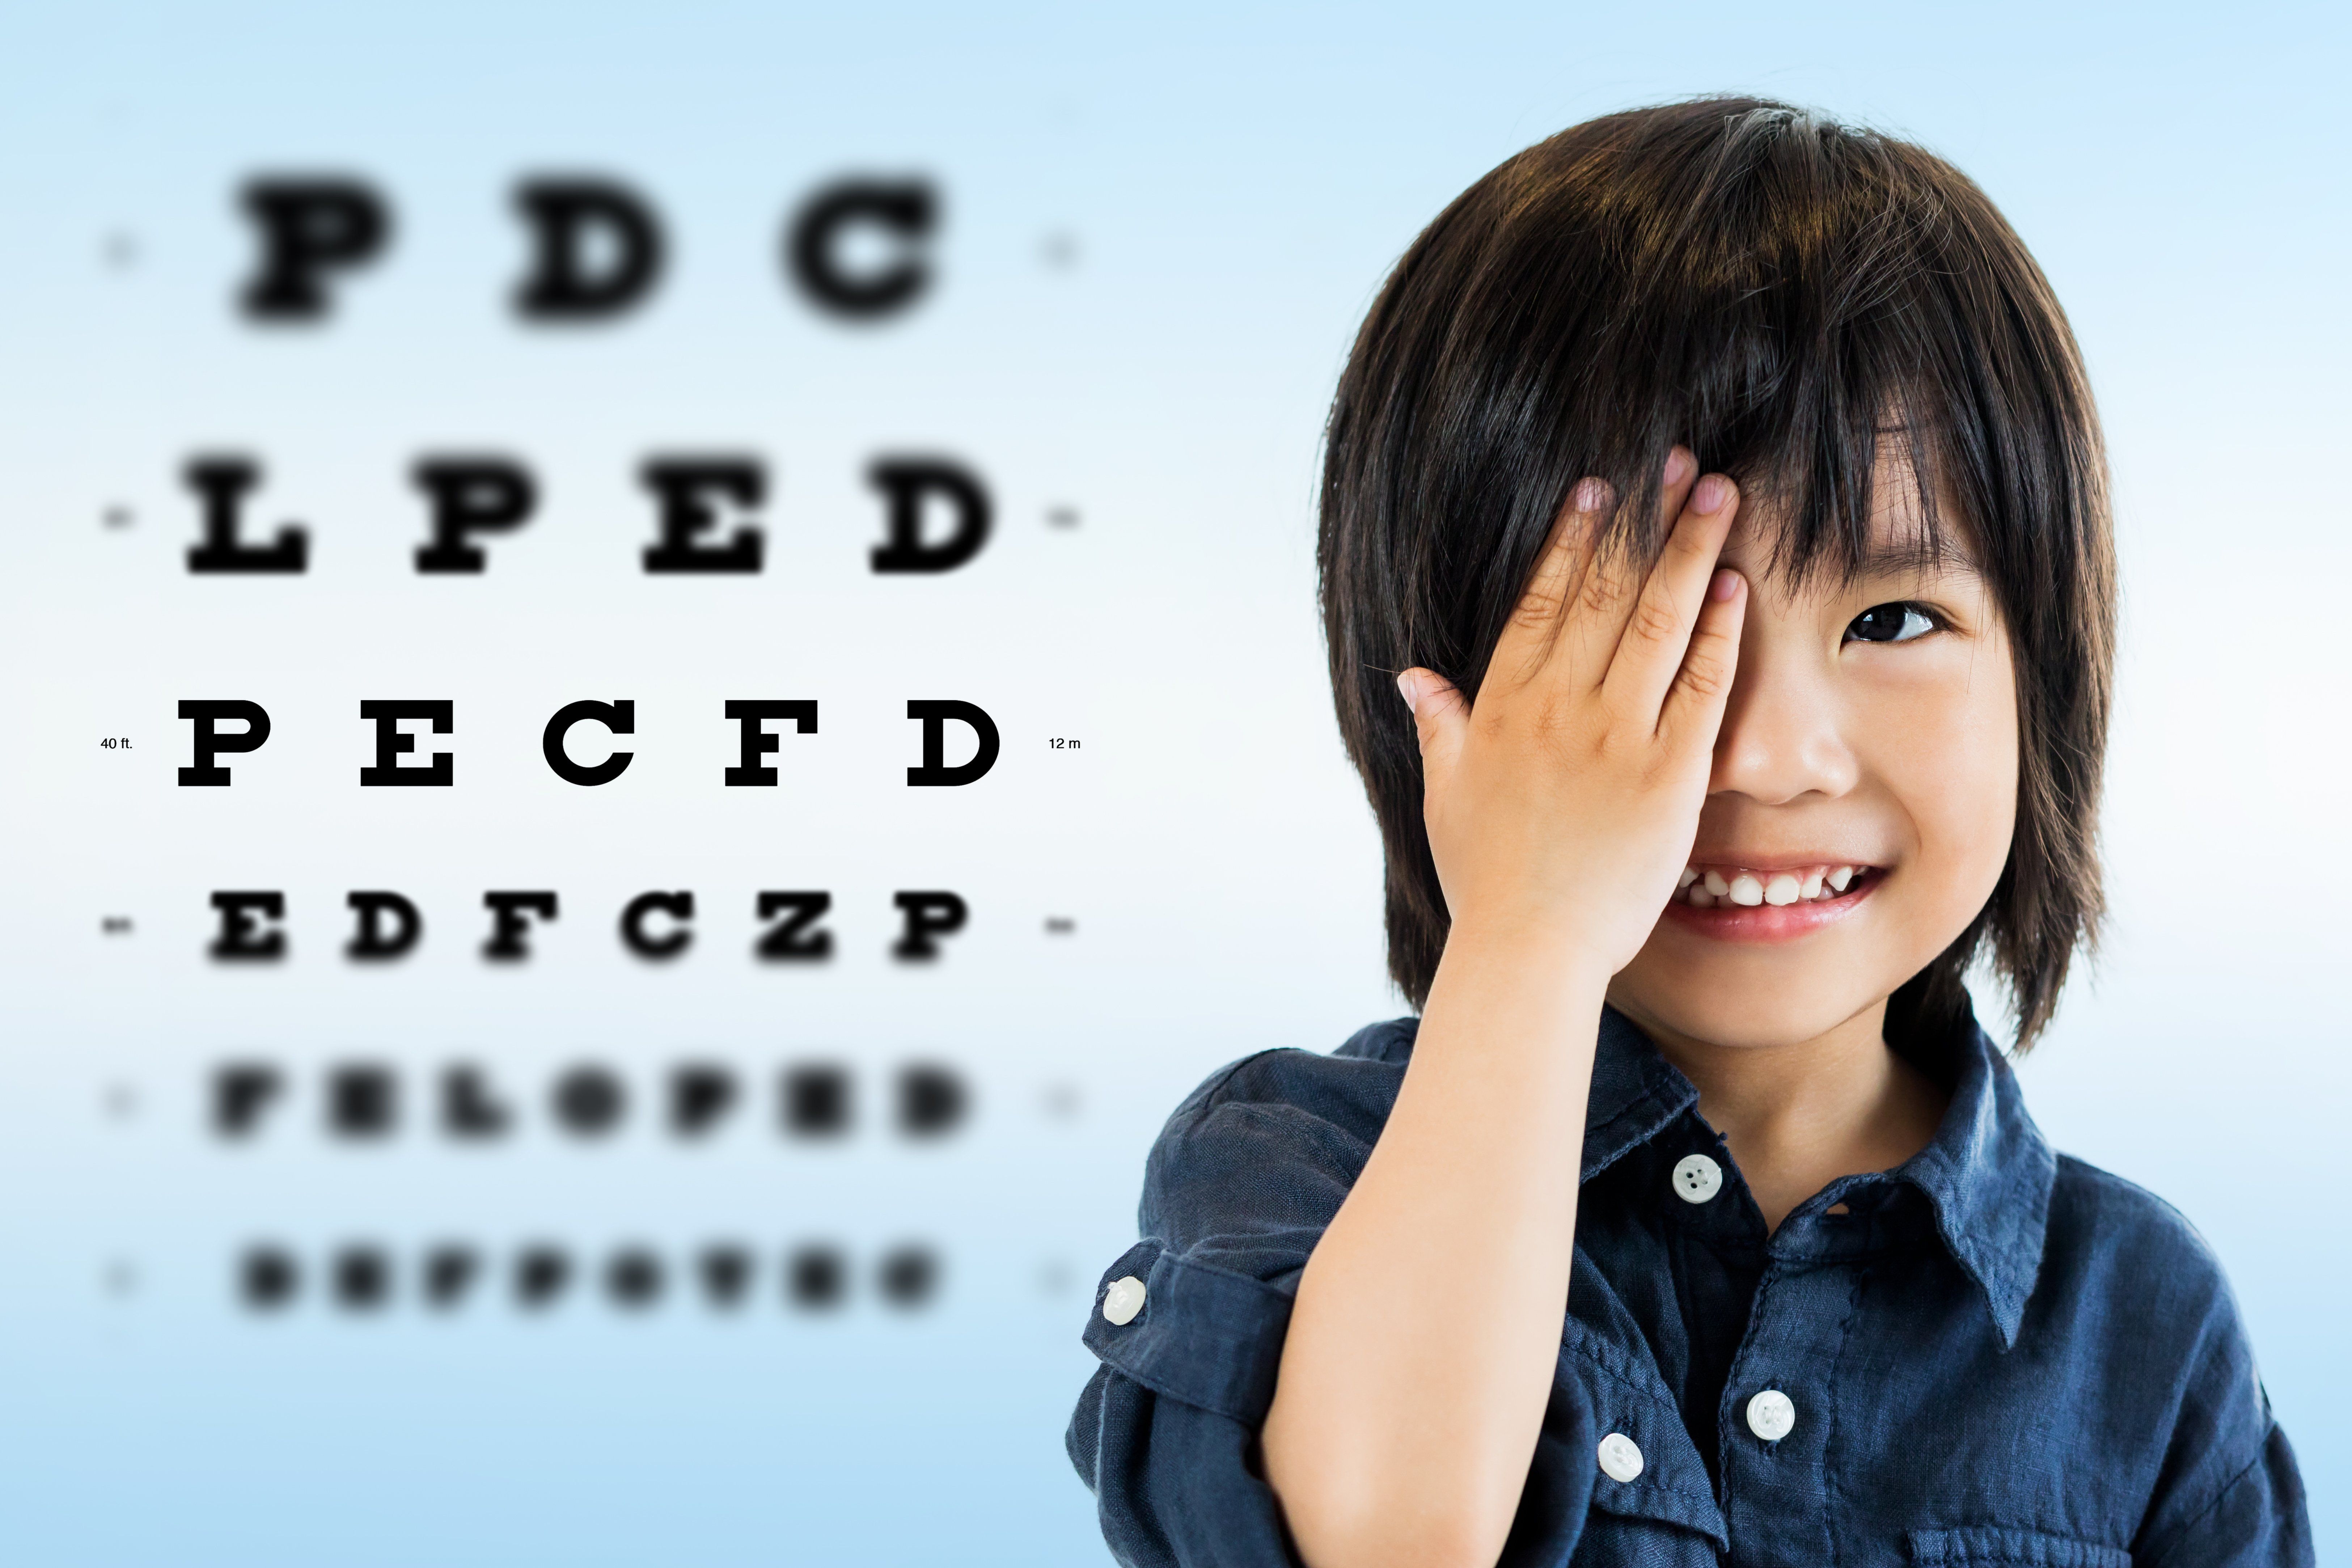 Common Signs Your Child May Need an Eye Exam